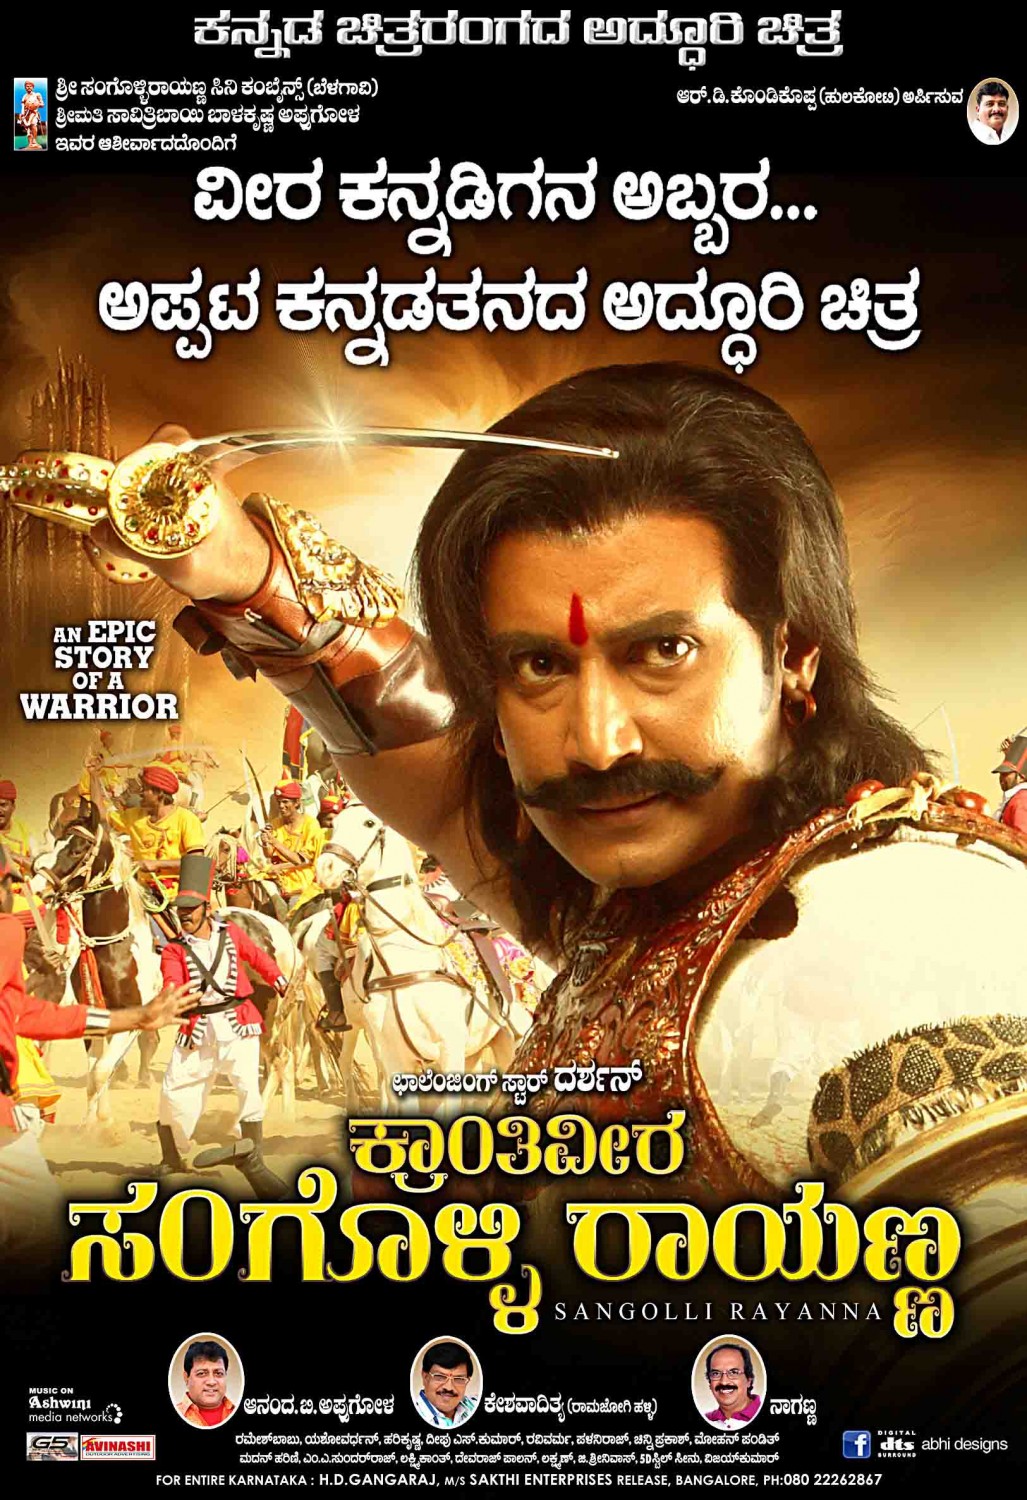 Extra Large Movie Poster Image for Sangolli Rayanna (#52 of 79)